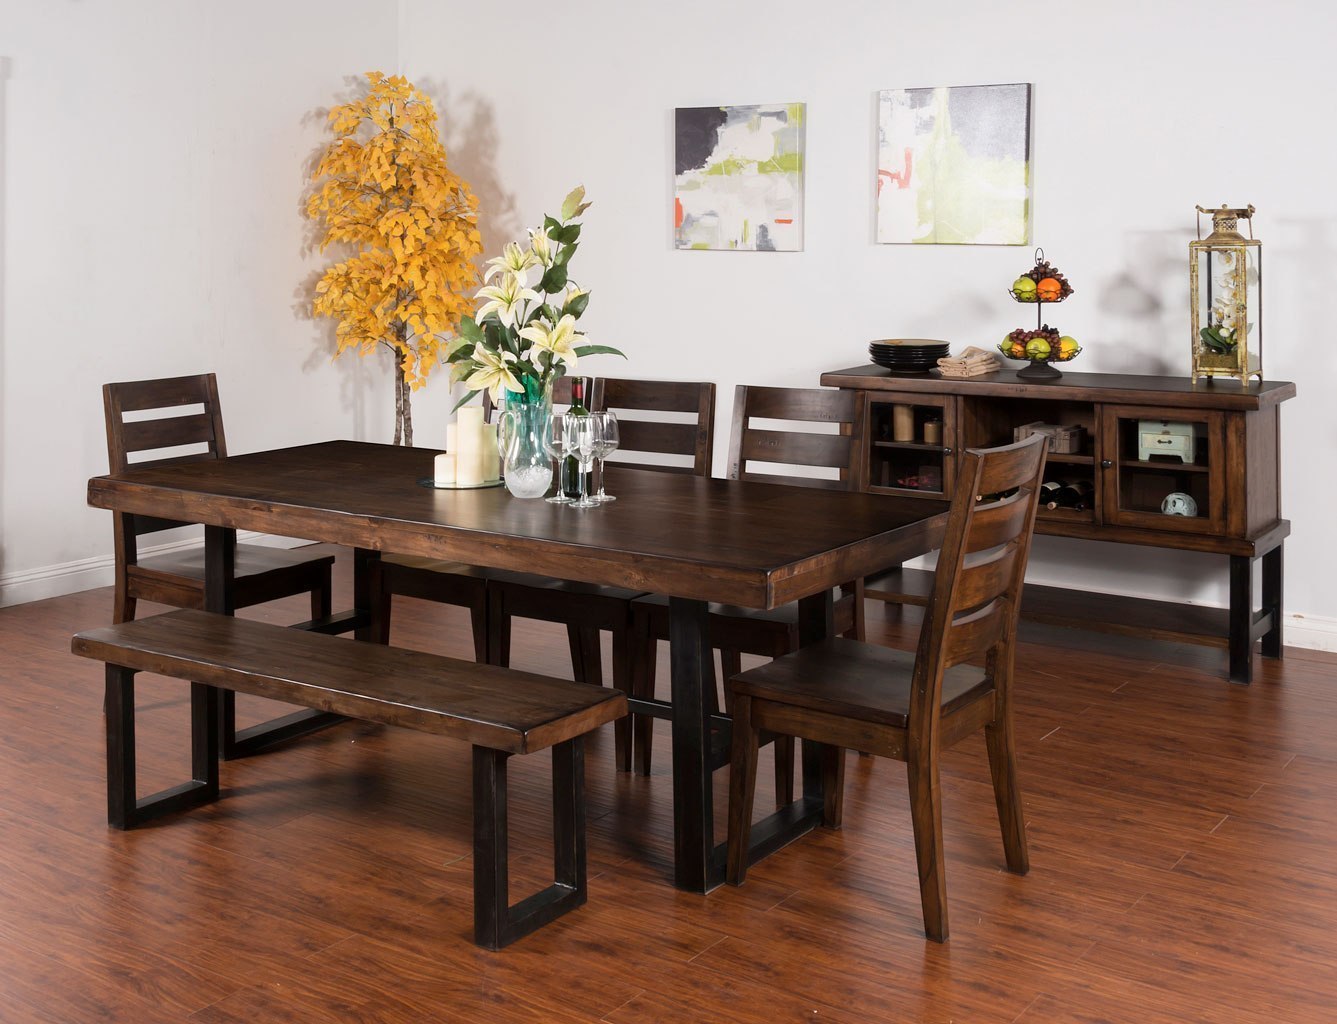 Reclaimed Pine Wood Dining Room Sets